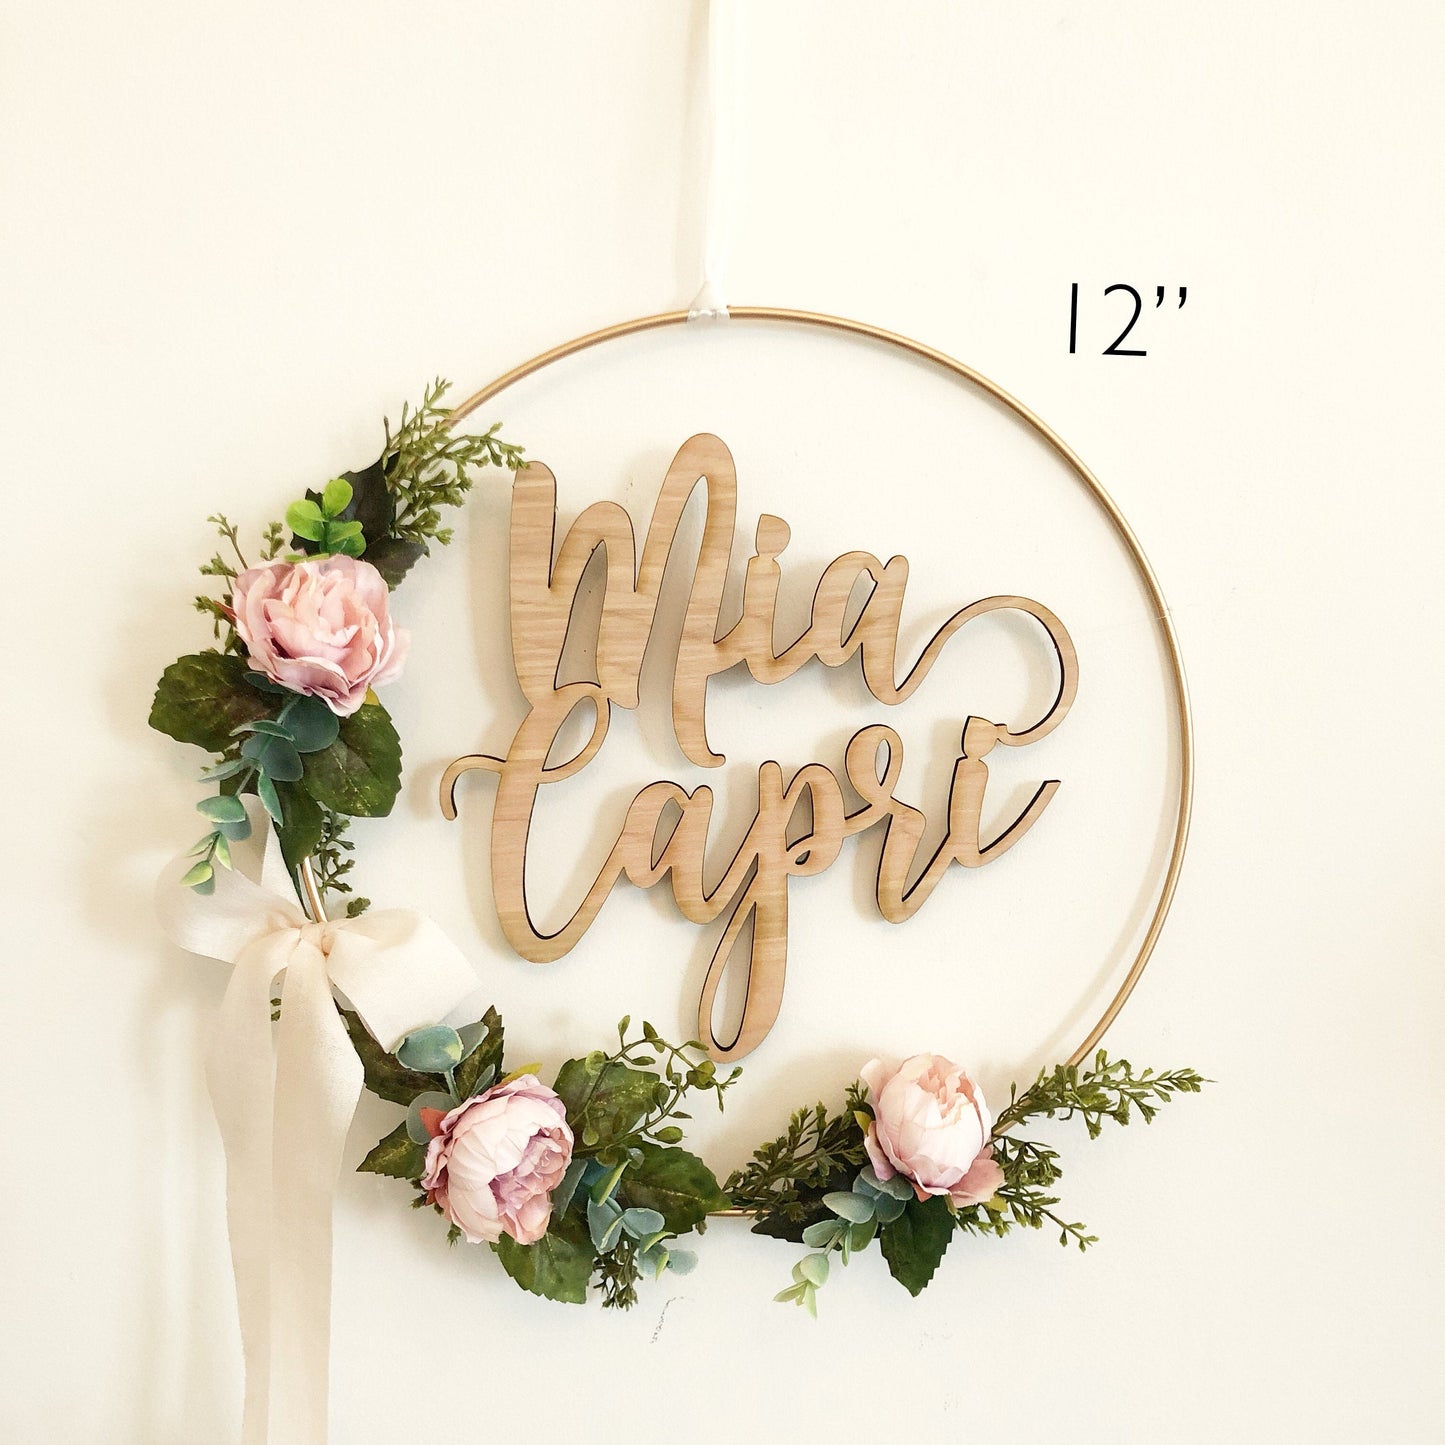 19 Inch Nursery Wreath With Name - Blush and Cream flowers available